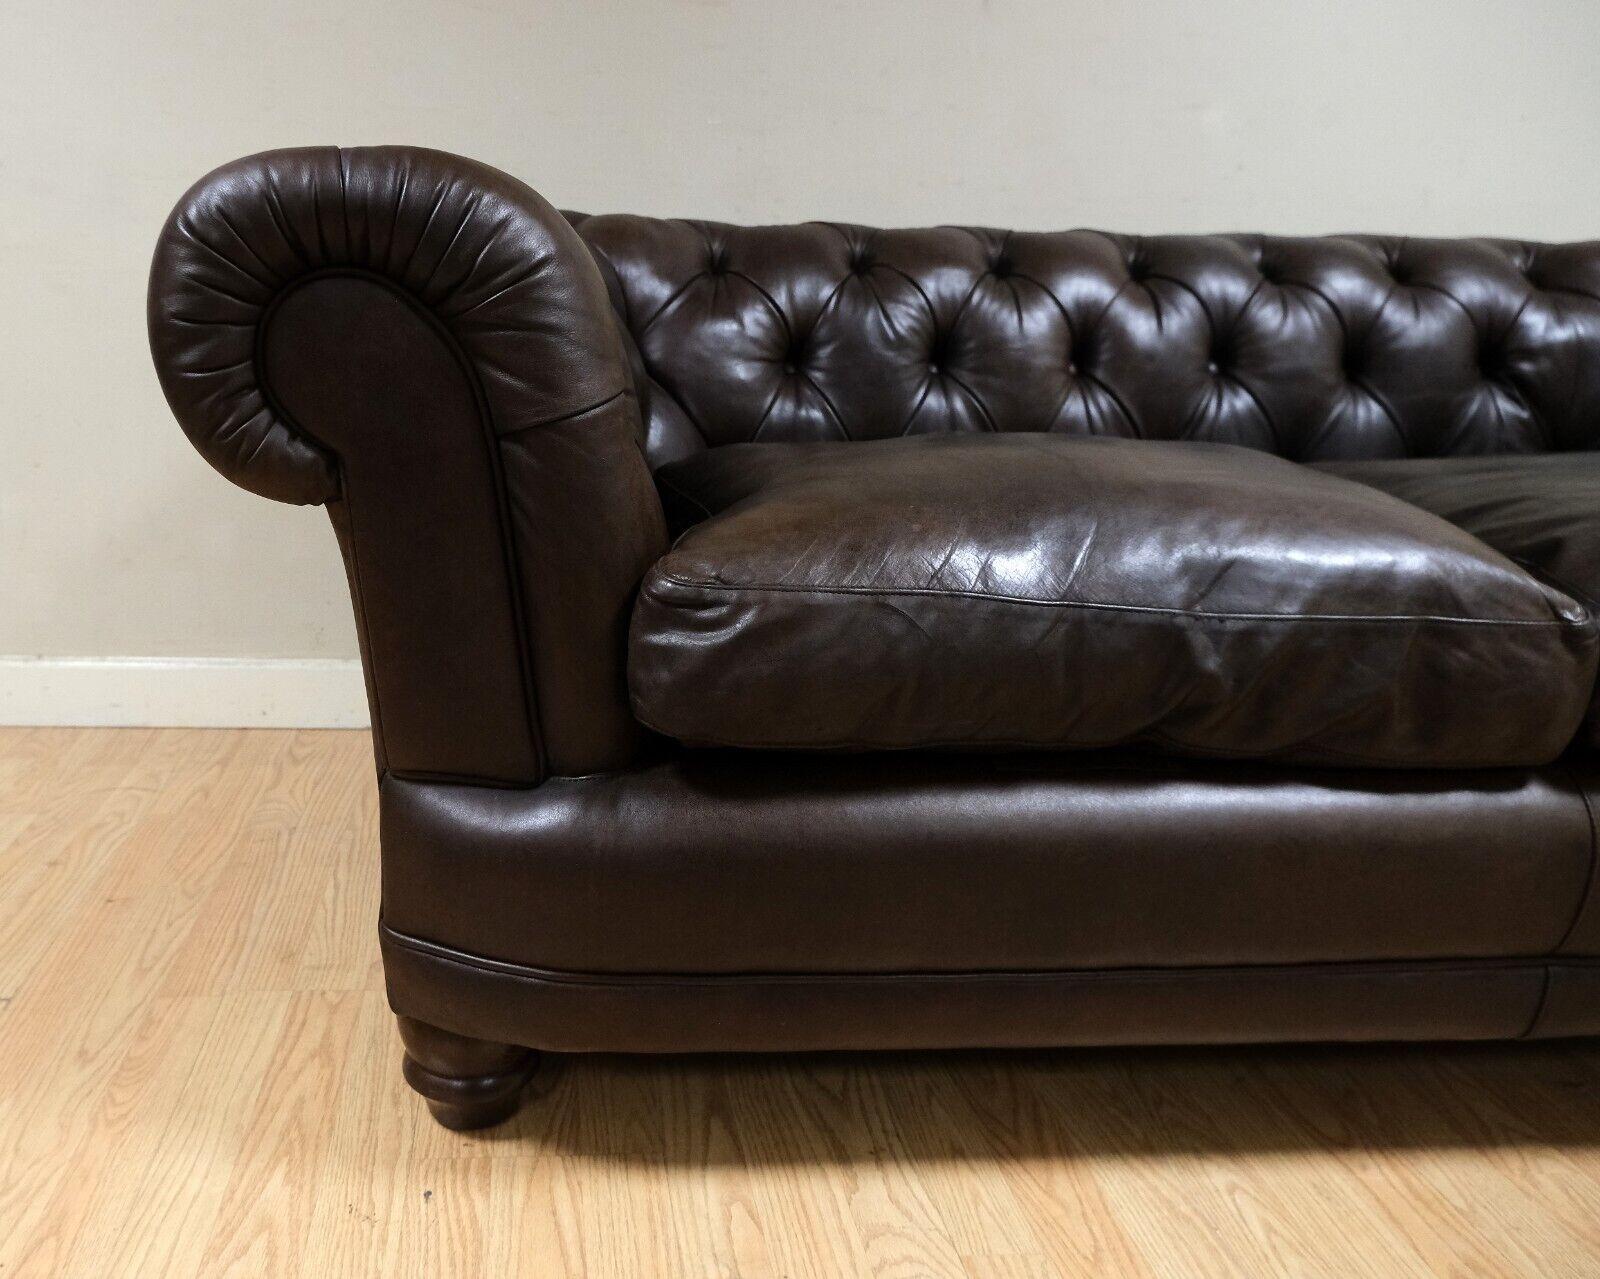 Choclate Brown Chesterfield Two Seater Leather Sofa Feather Filled Cushions 10